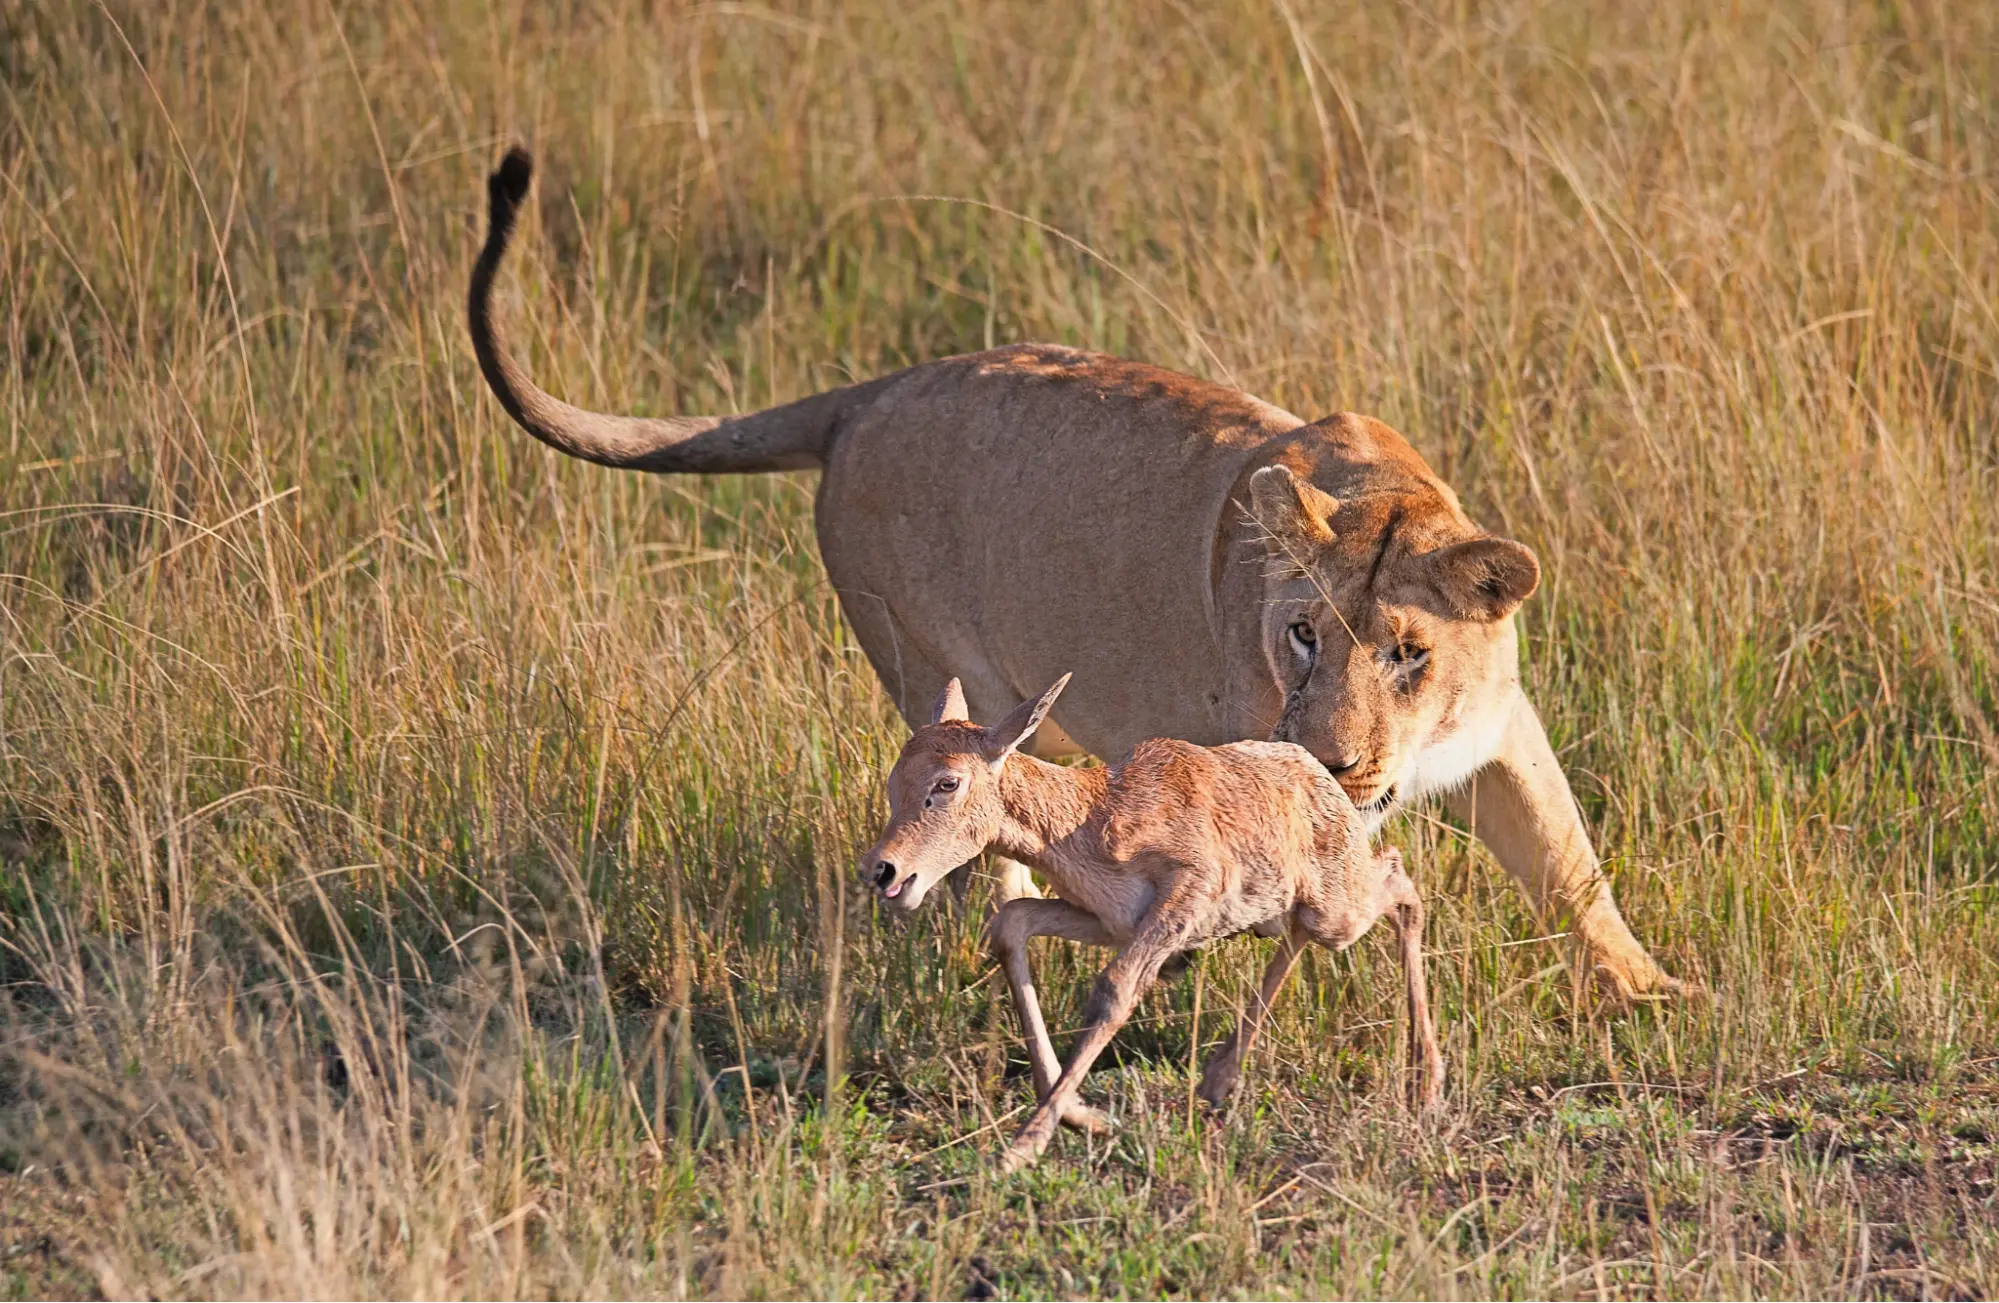 Working out how much Kenya Safari costs - a lioness stalking a newborn prey